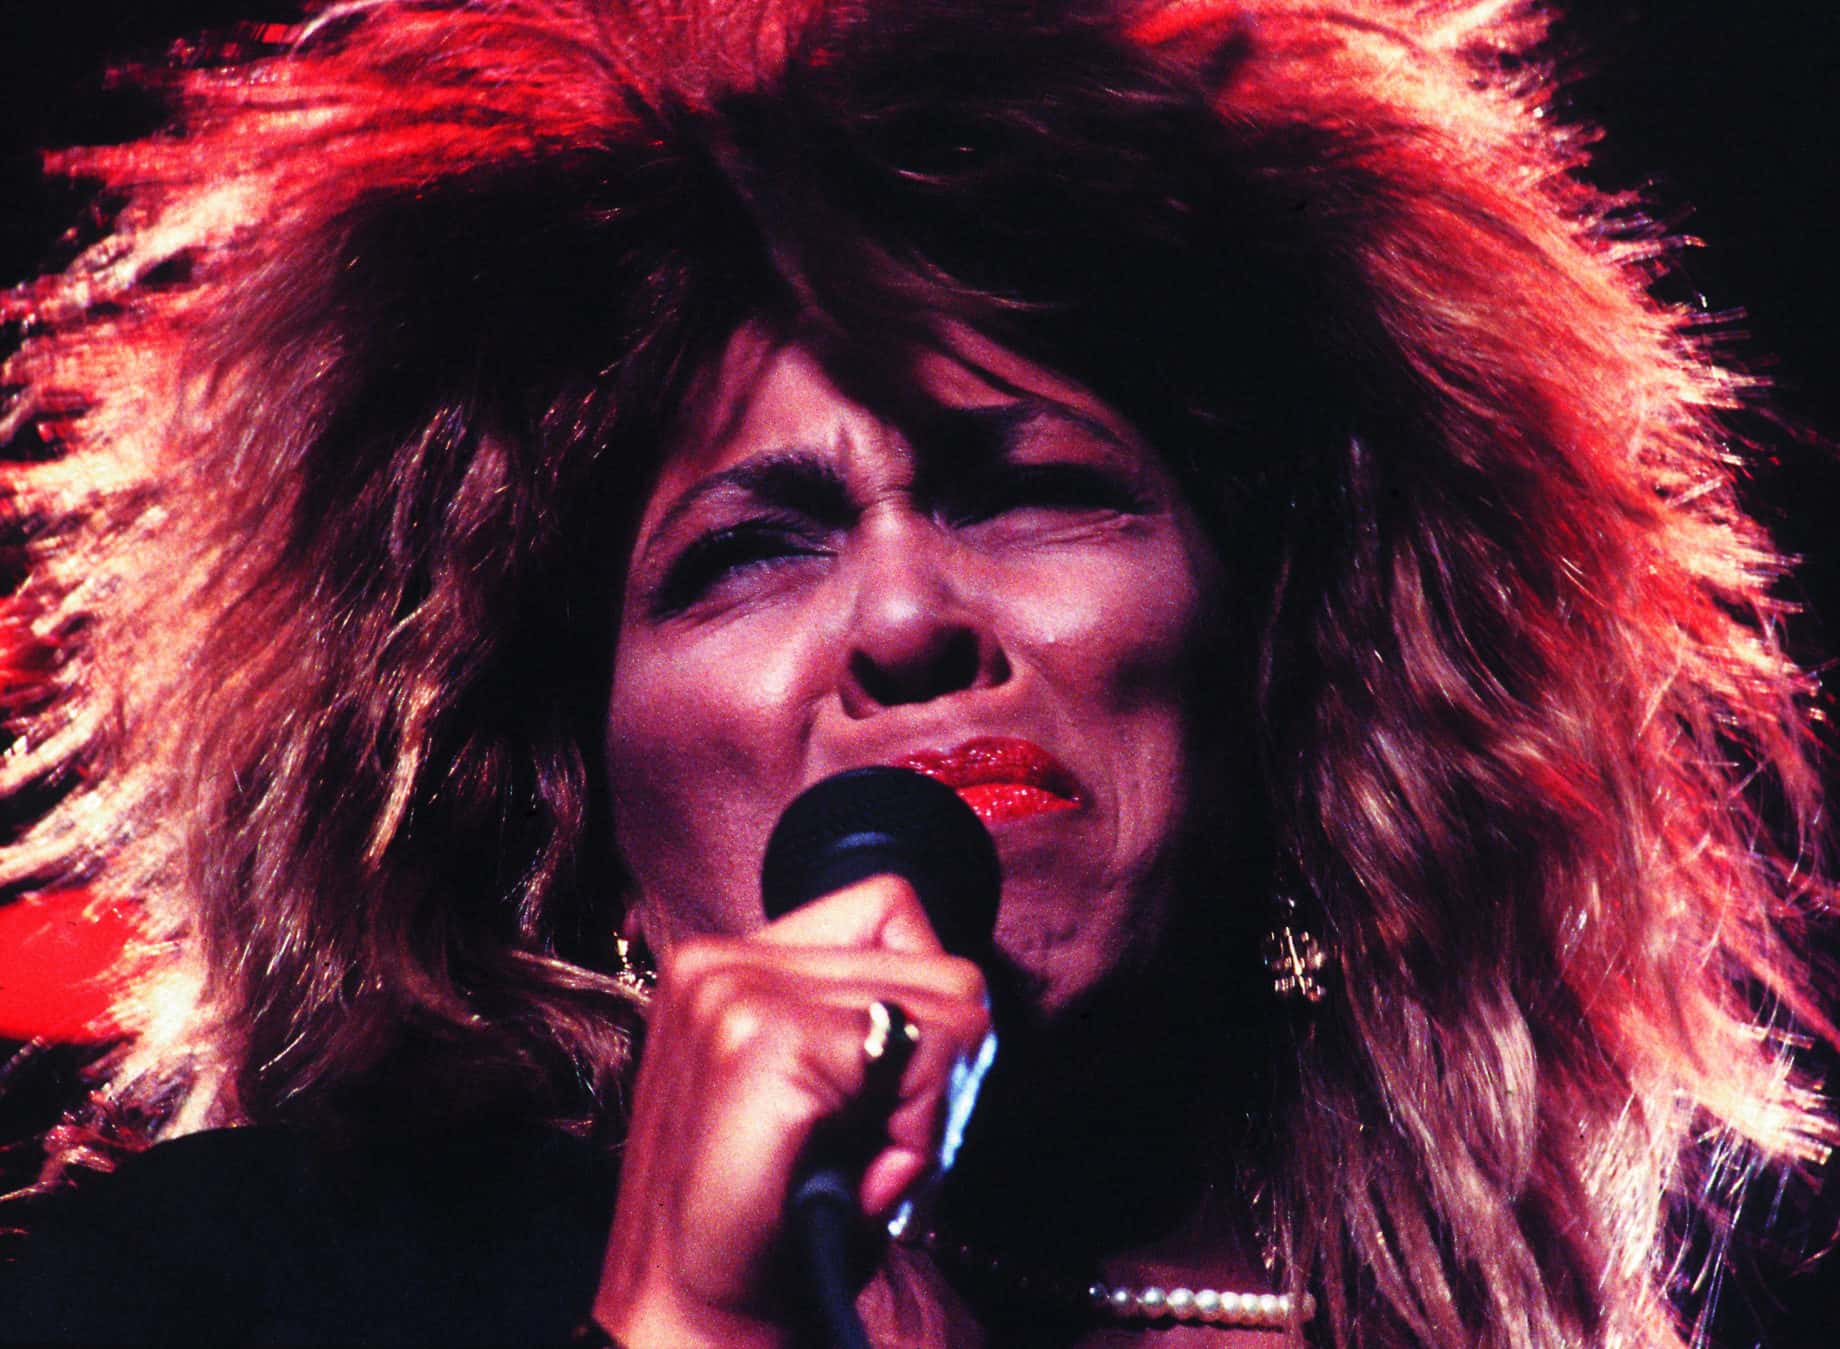 <p>Tina Turner might be an American soul music legend, but she’s no longer an American. The singer took up residence in Switzerland in 1994, and in 2013 announced she would renounce her American citizenship and apply to be a Swiss citizen. She learned to speak fluent German and passed a citizenship test that required extensive knowledge of Swiss history.</p>